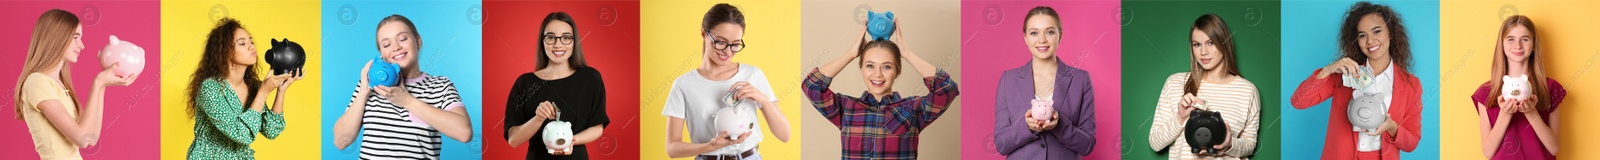 Image of Collage with photos of women holding piggy banks on different color backgrounds. Banner design